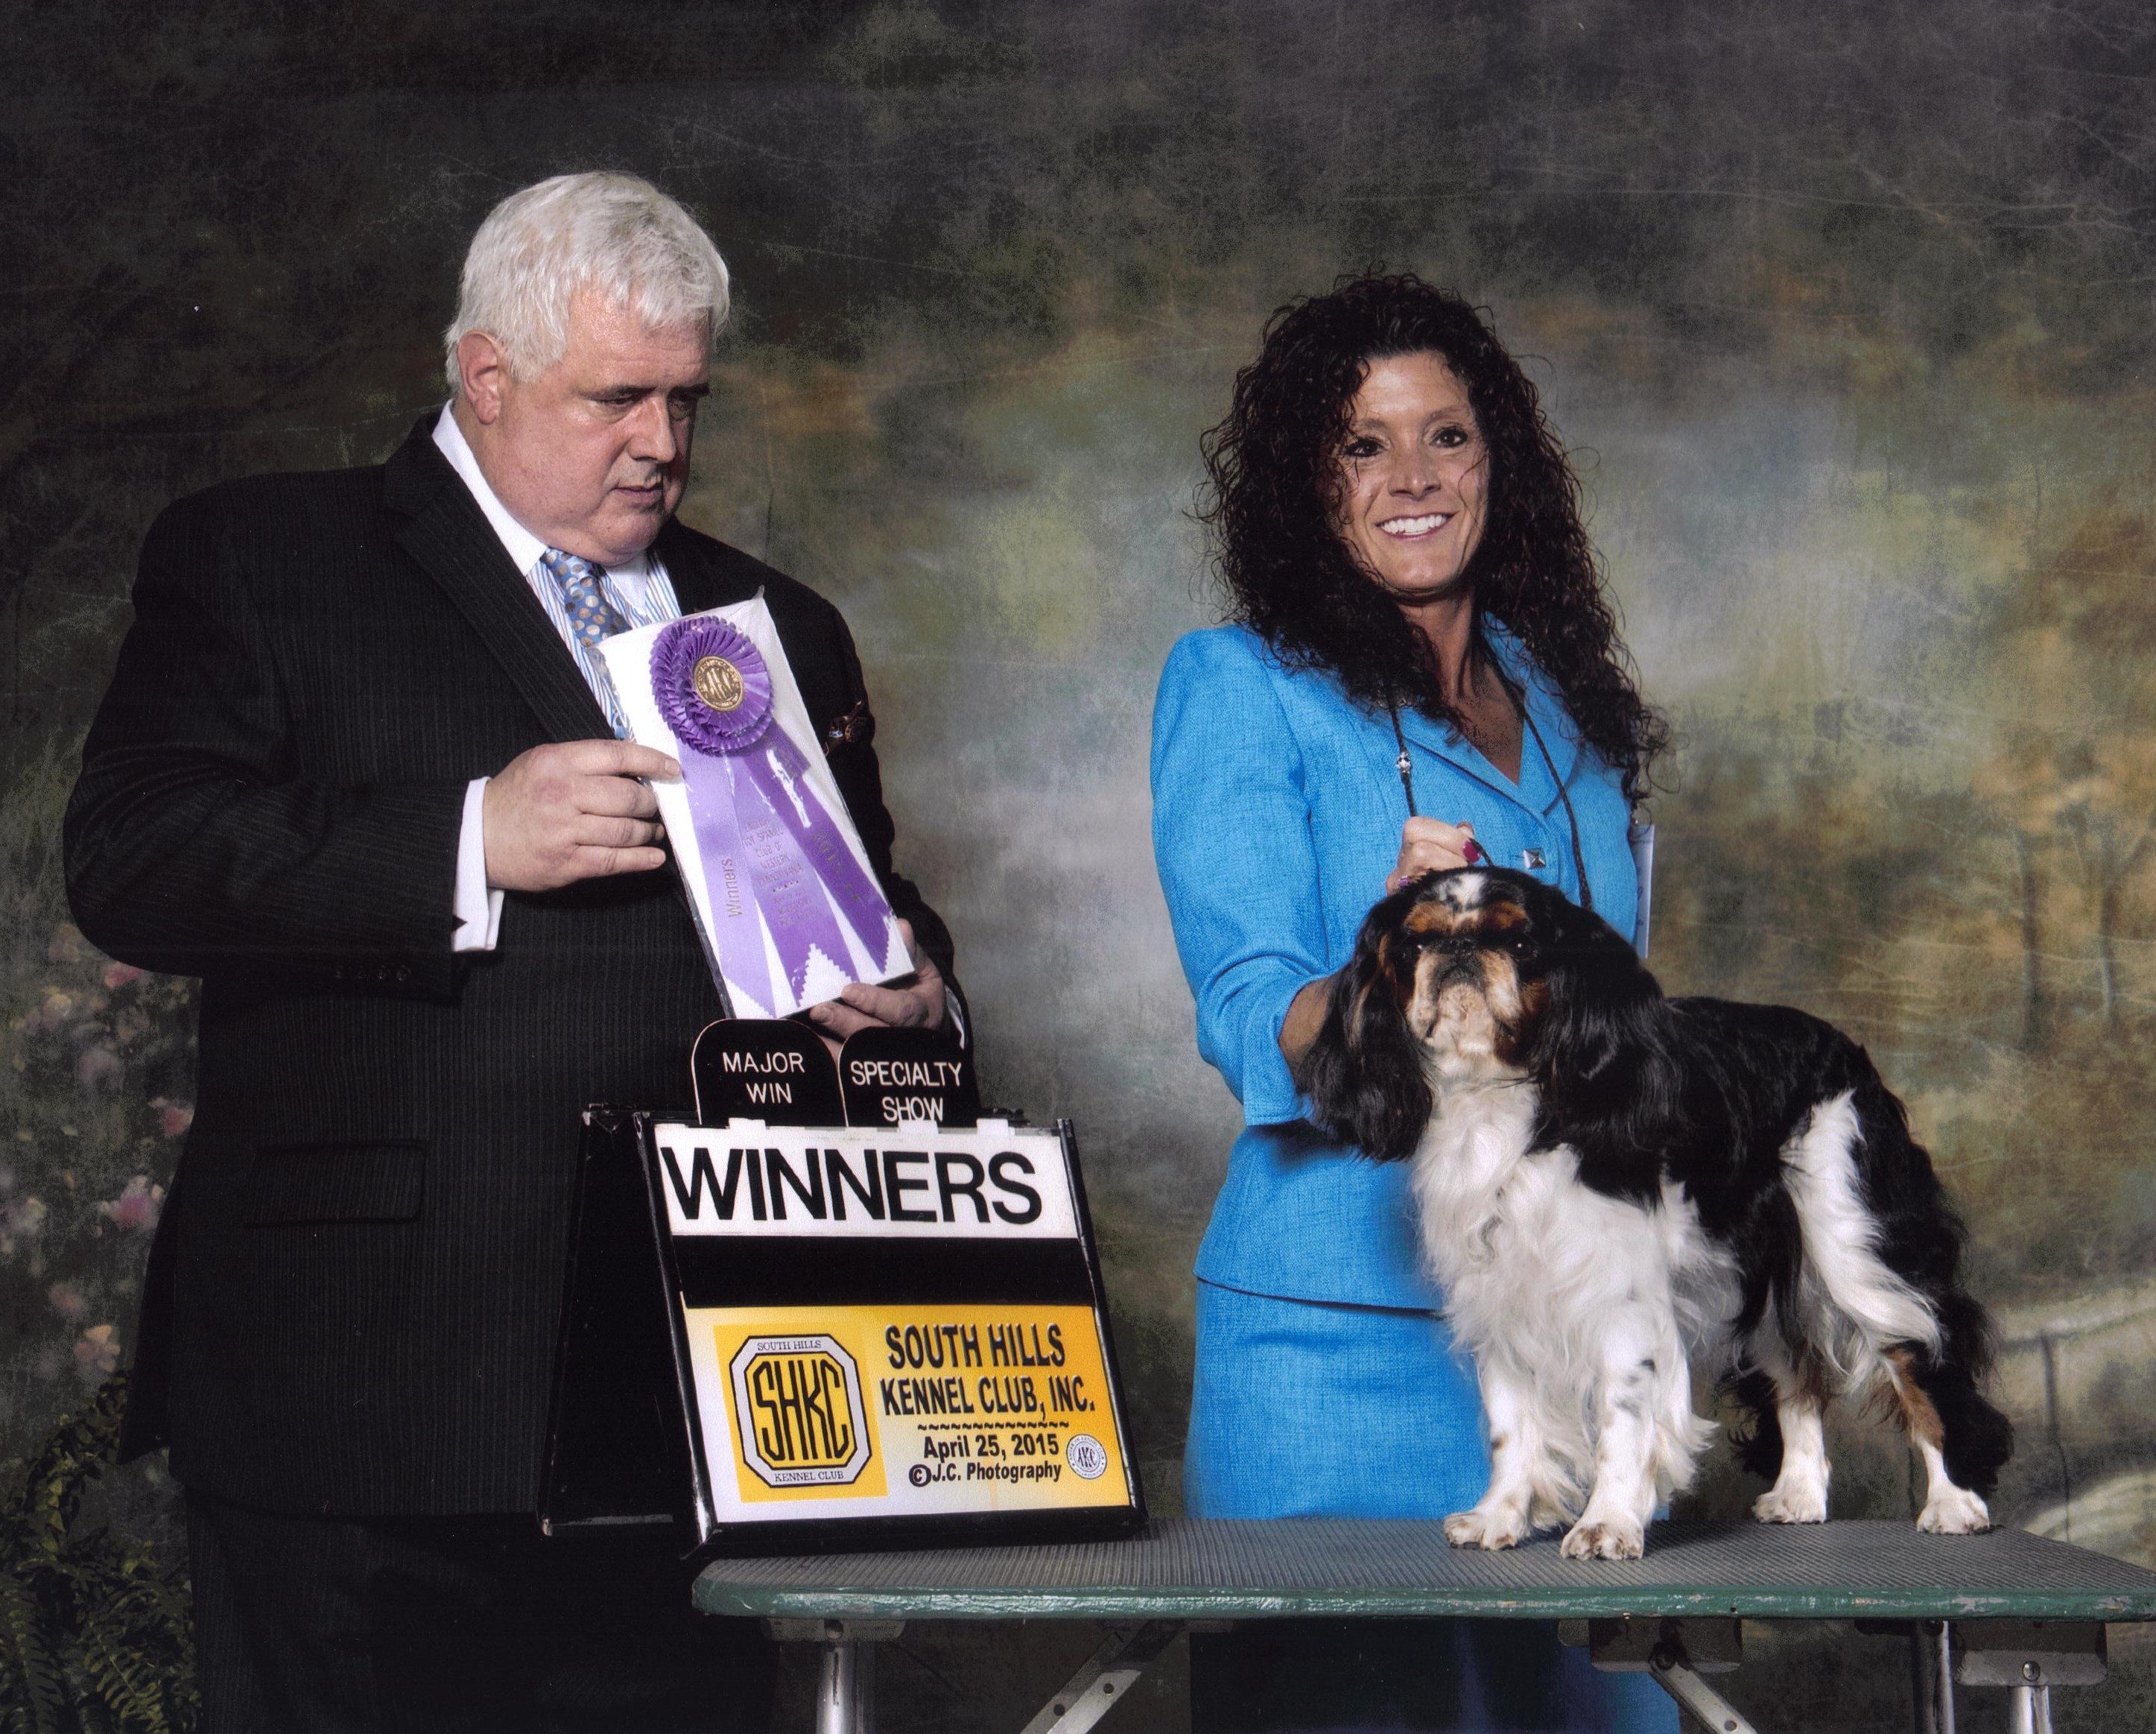 Major win at The English Toy Spaniel Club of Western PA Specialty show in Morgantown, WV